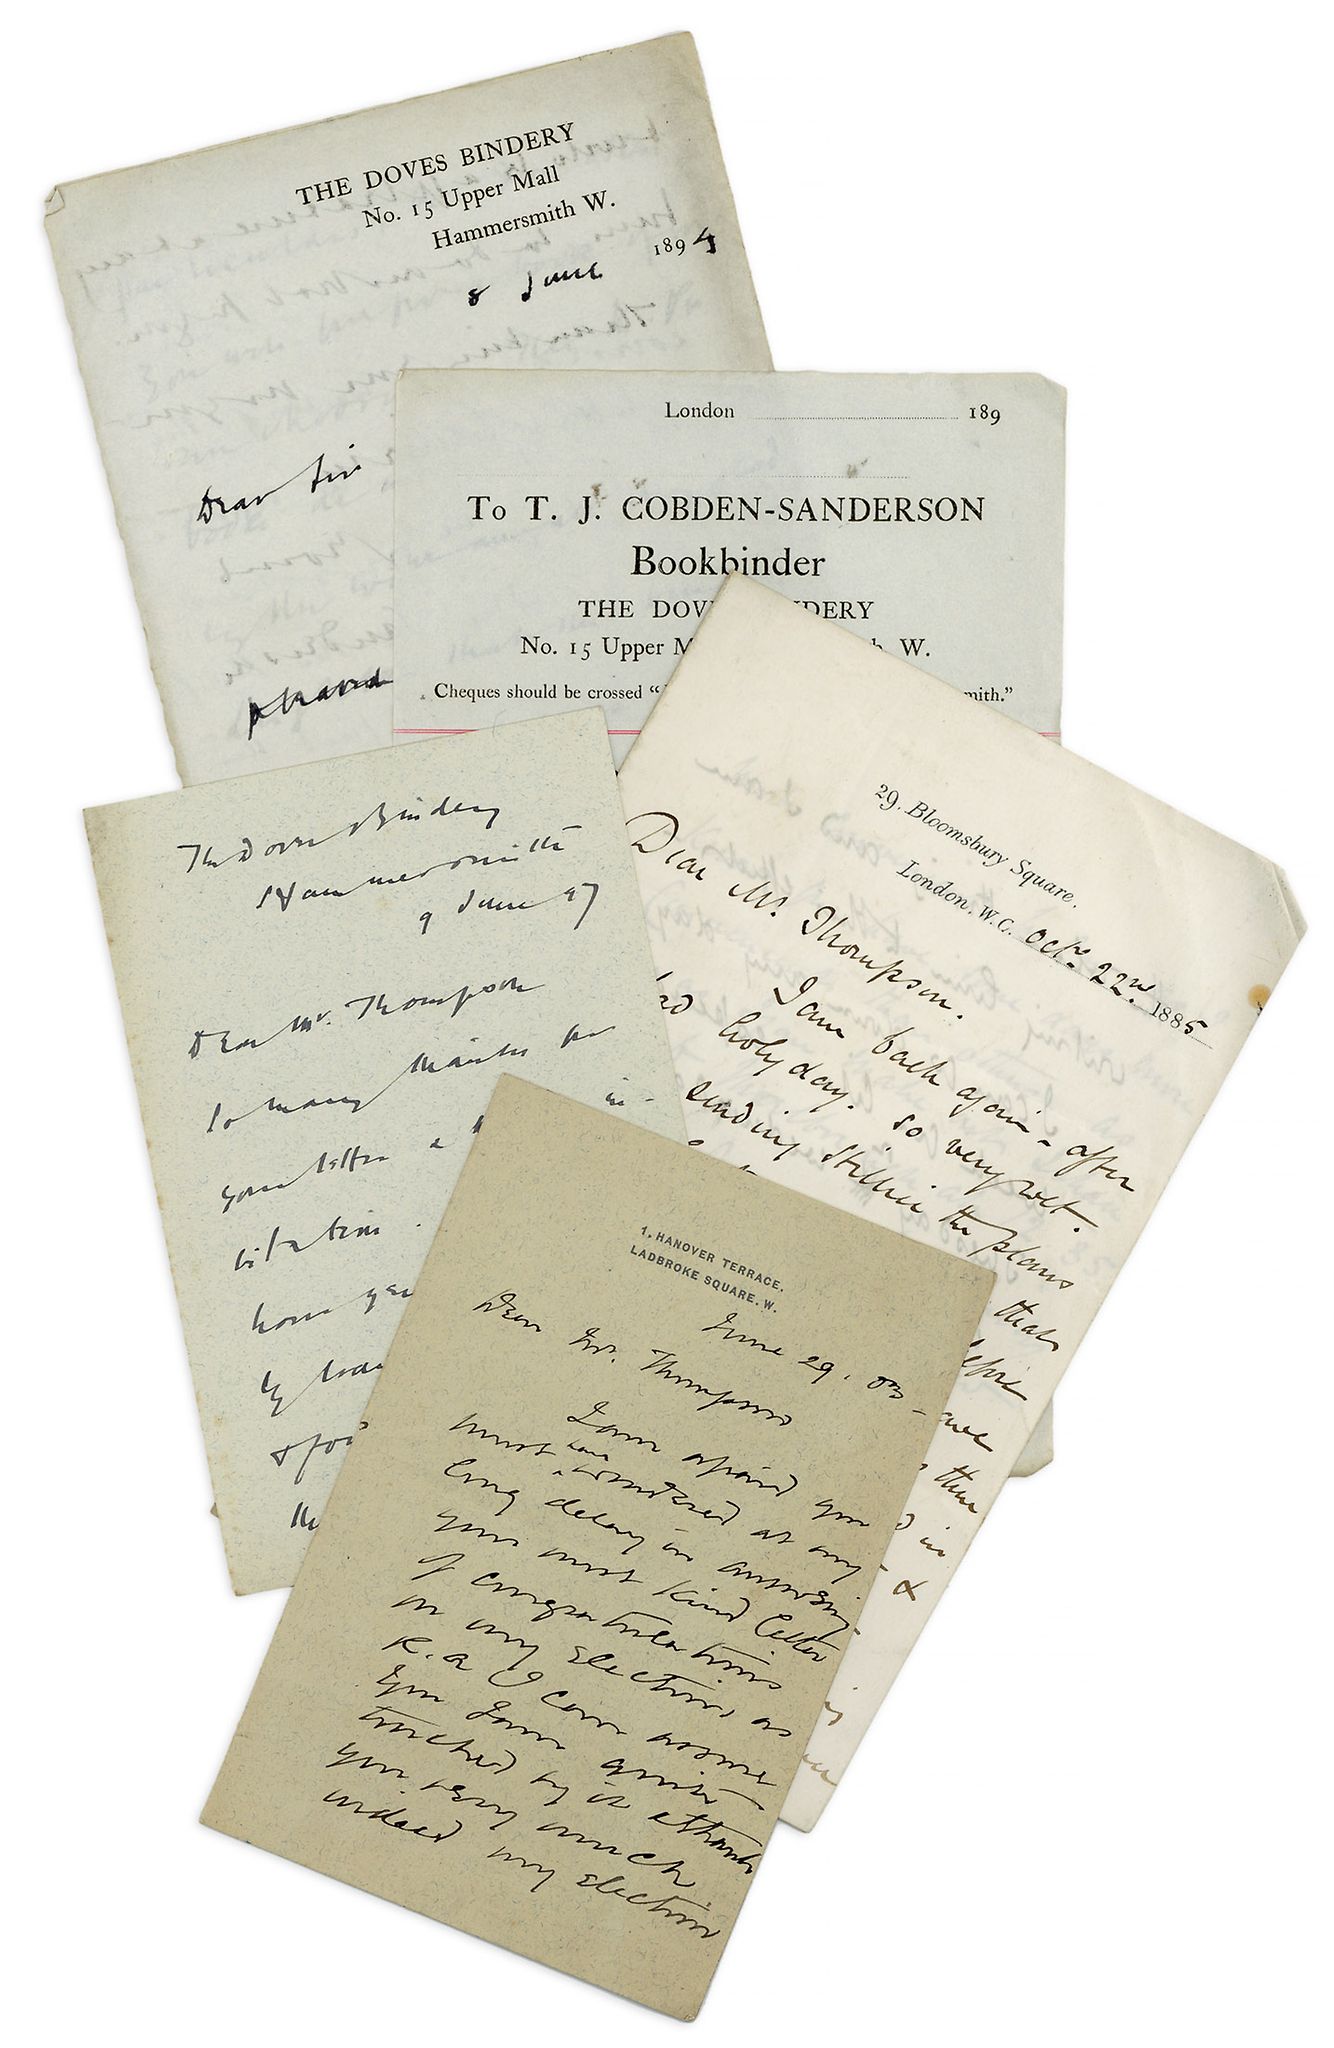 ARTISTS & ARCHITECTS - LATE 19TH CENTURY - Group of autograph letters and cards signed by